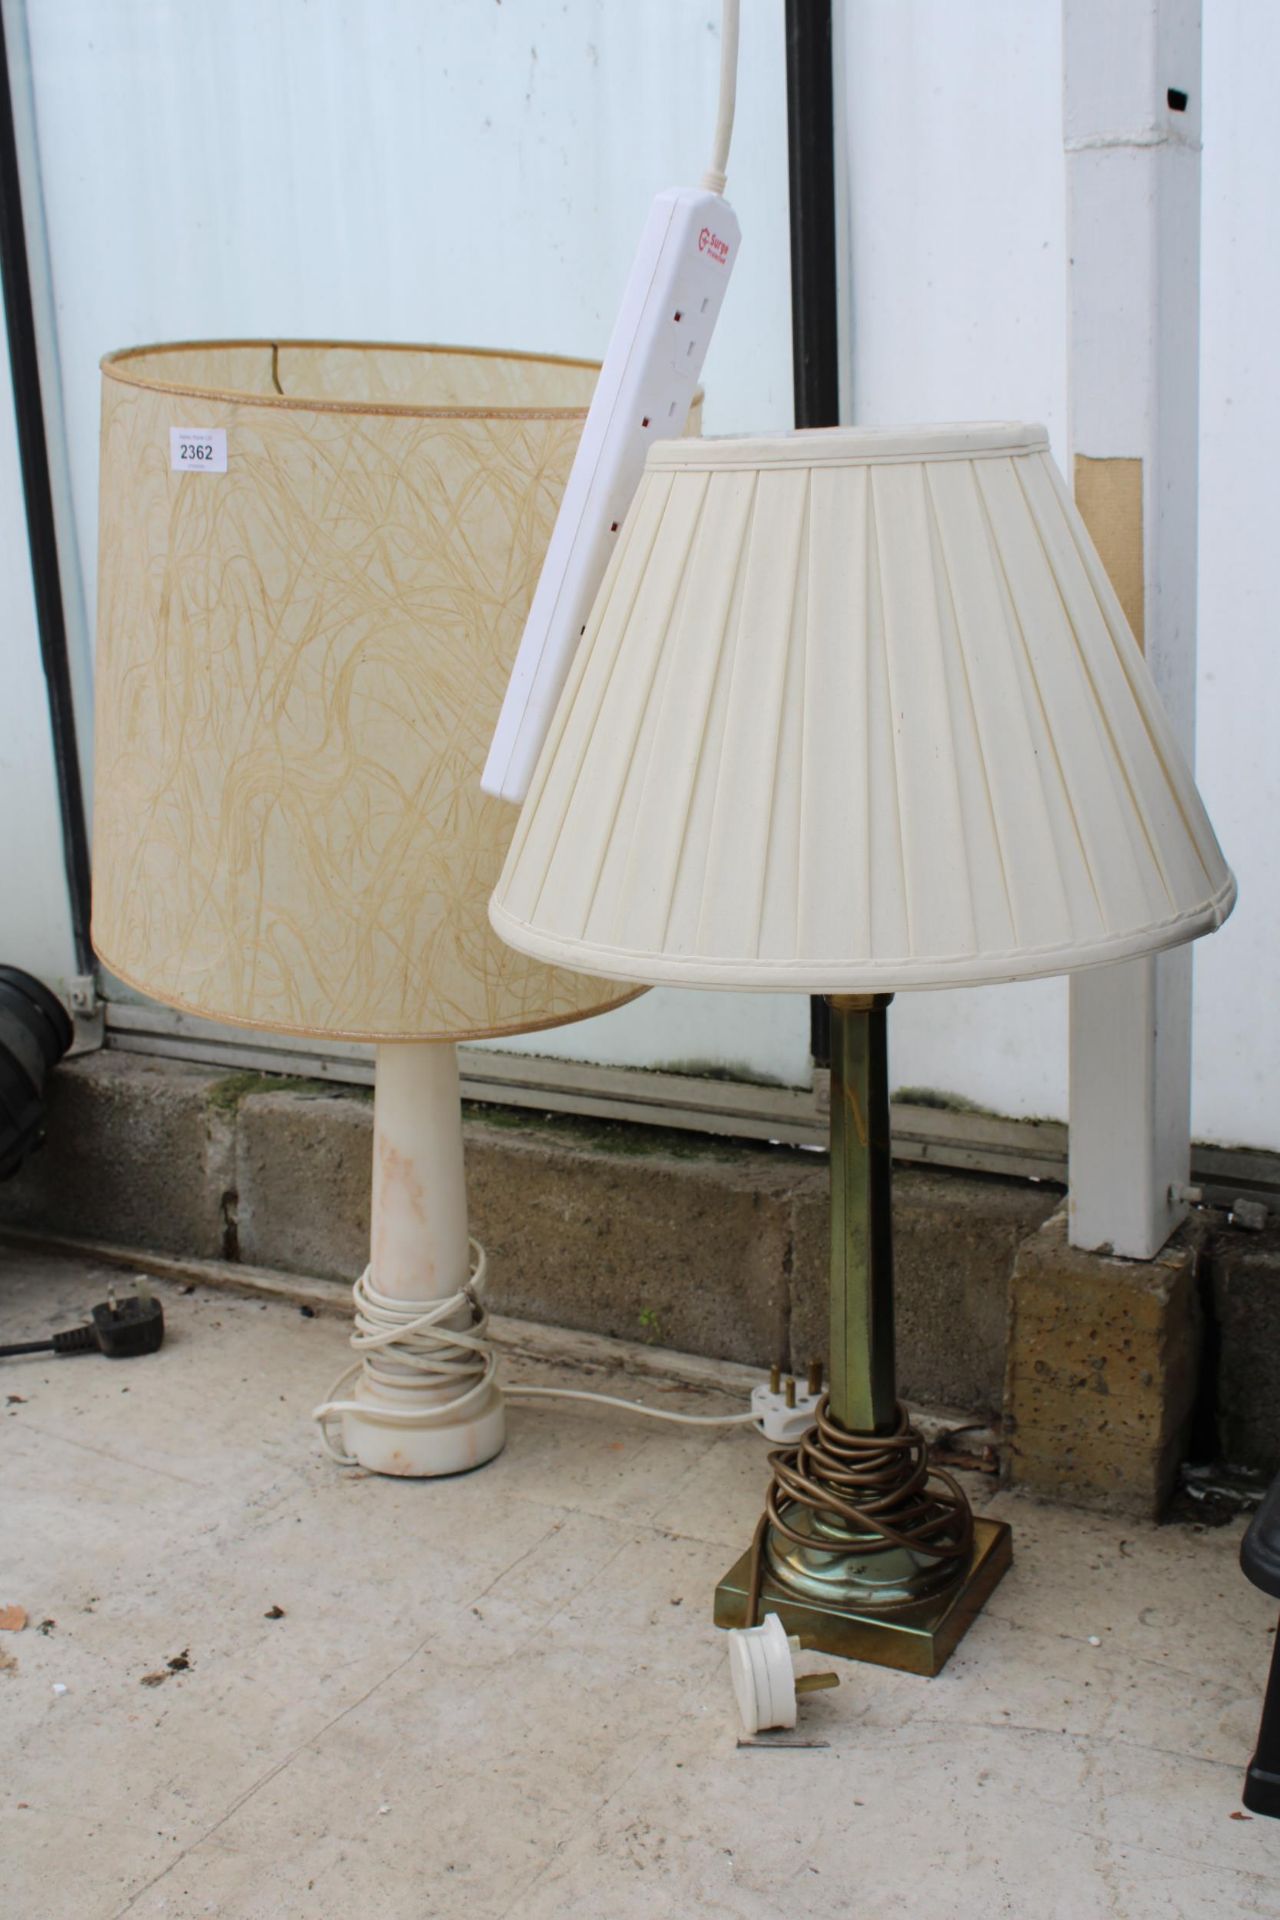 THREE ITEMS TO INCLUDE TWO TABLE LAMPS AND A DIMPLEX ELECTRIC FIRE - Image 2 of 2